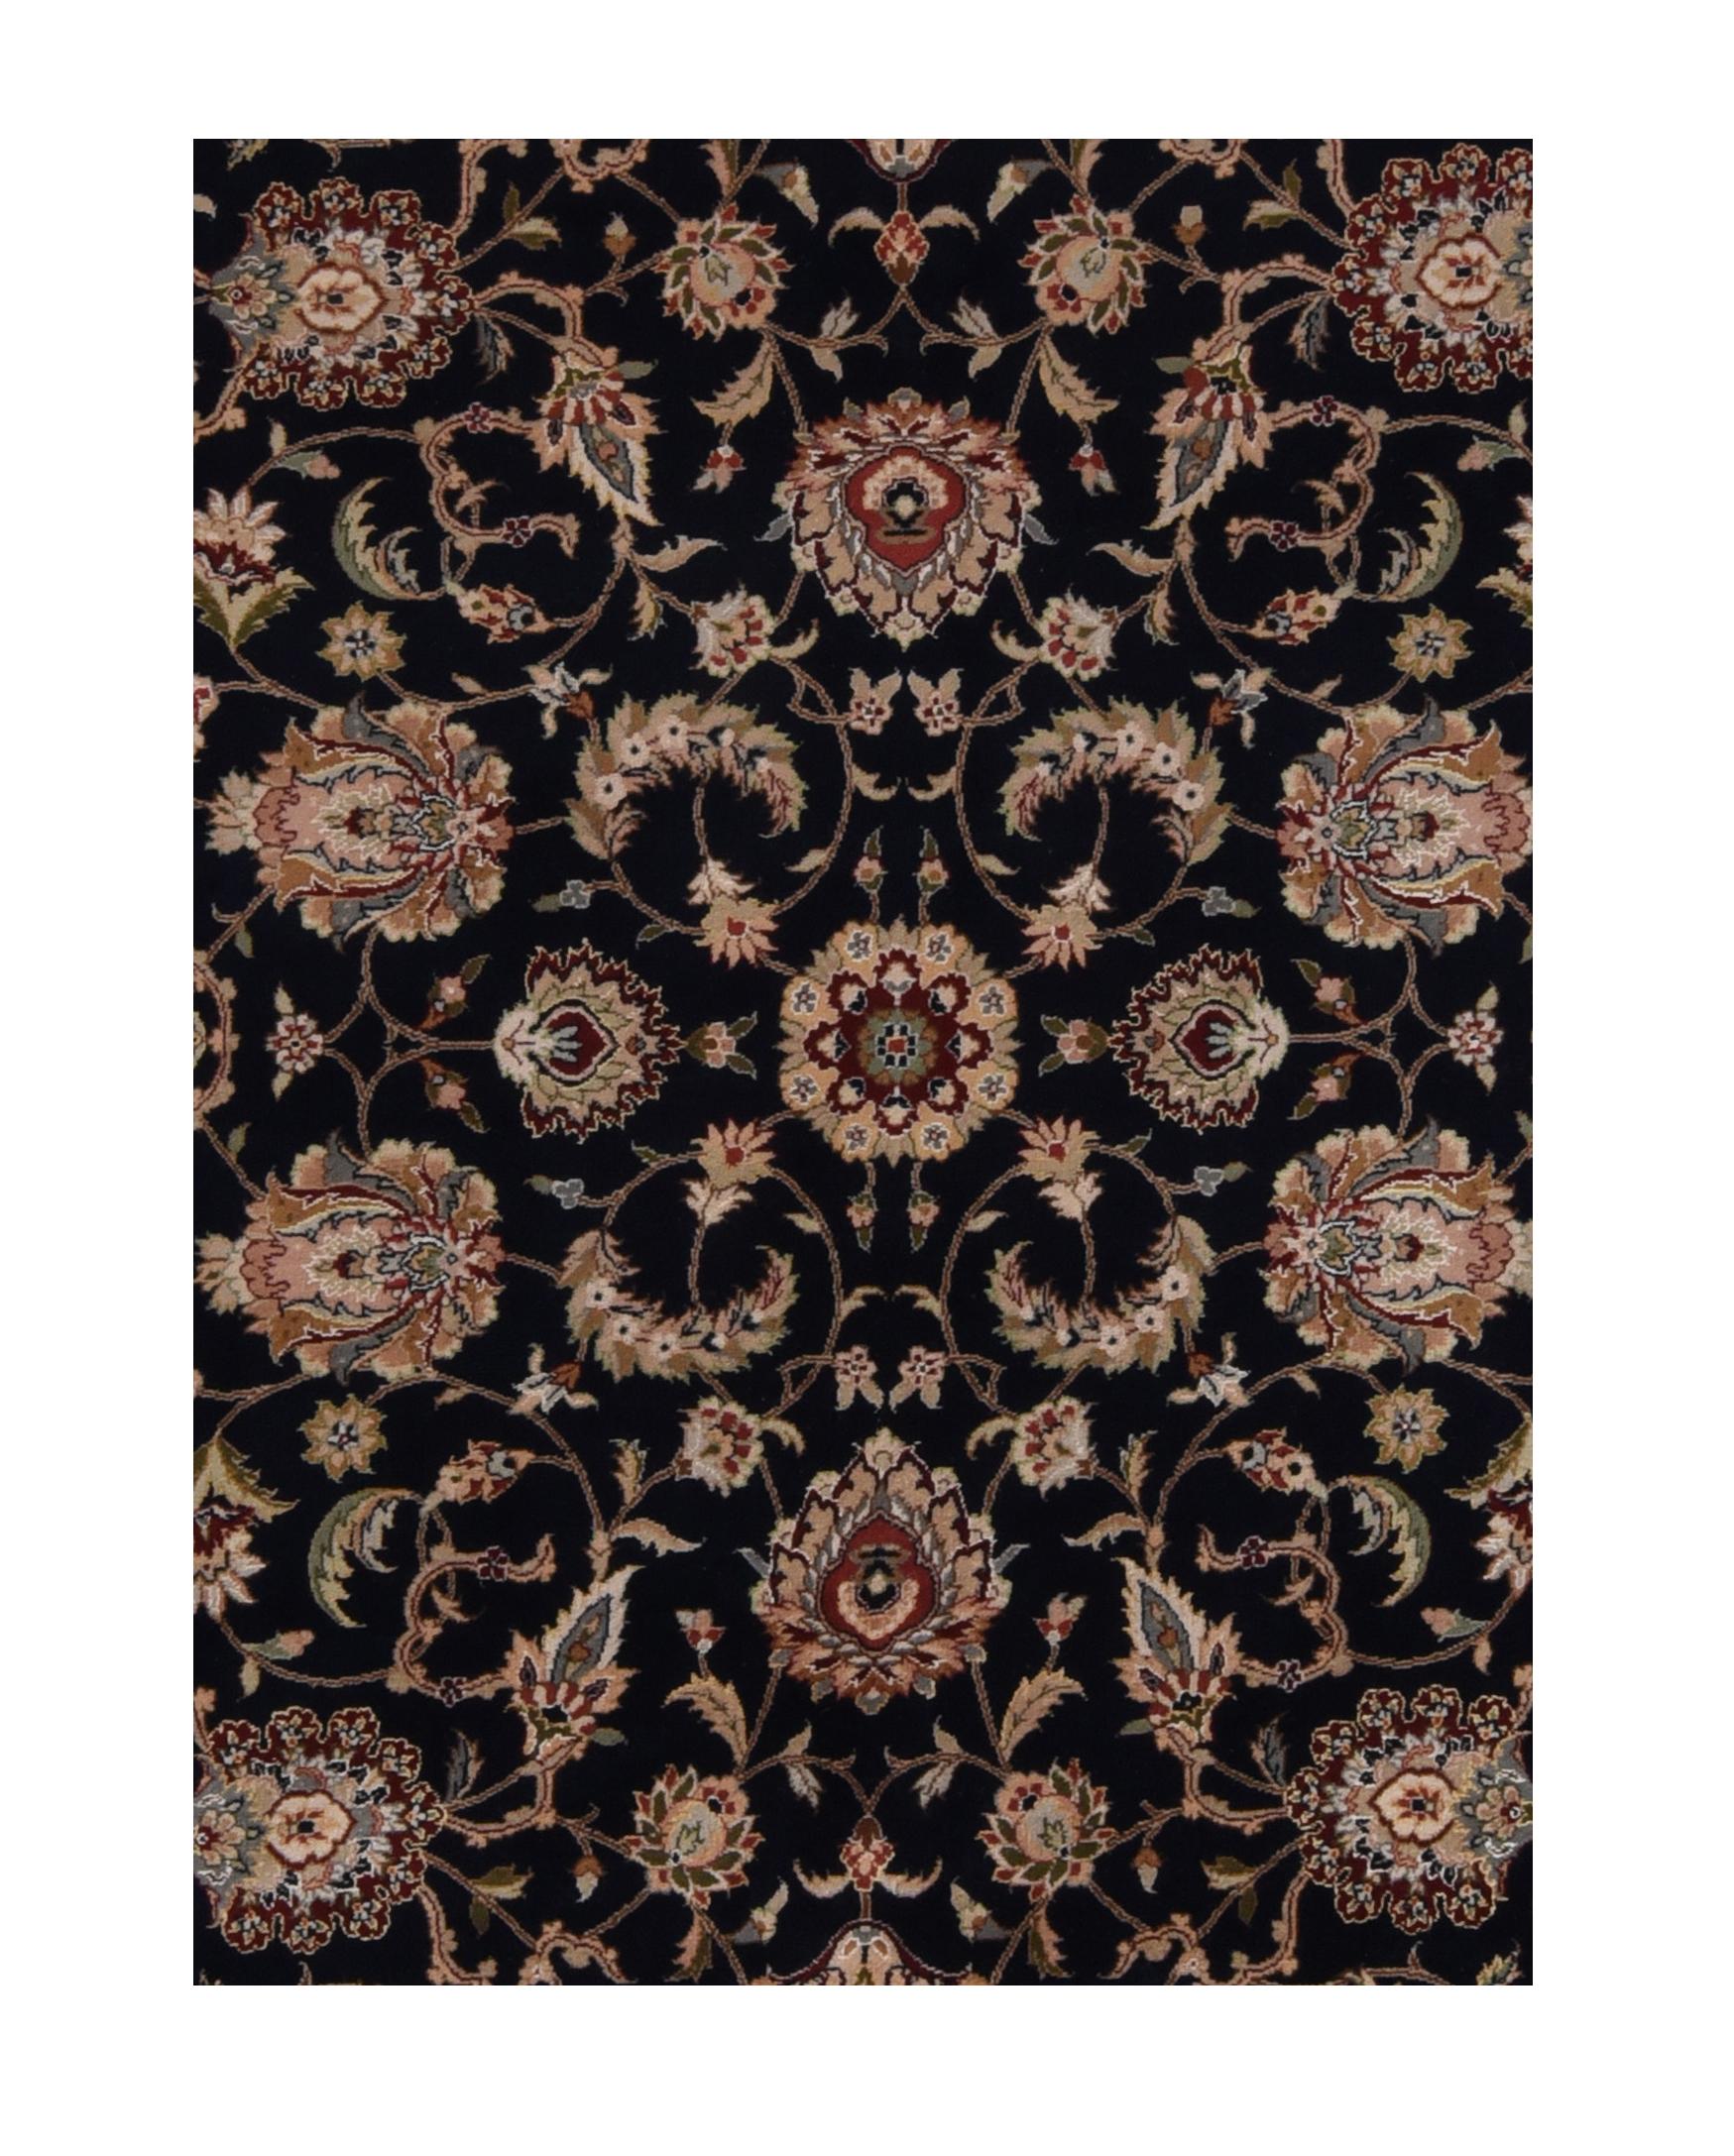 Fine Pak Persian Tabriz Design rug, wool, hand knotted

Design: Floral all-over

A Pakistani rug (Pak Persian Rug or Pakistani carpet) is a type of handmade floor-covering textile traditionally made in Pakistan.

The art of weaving developed